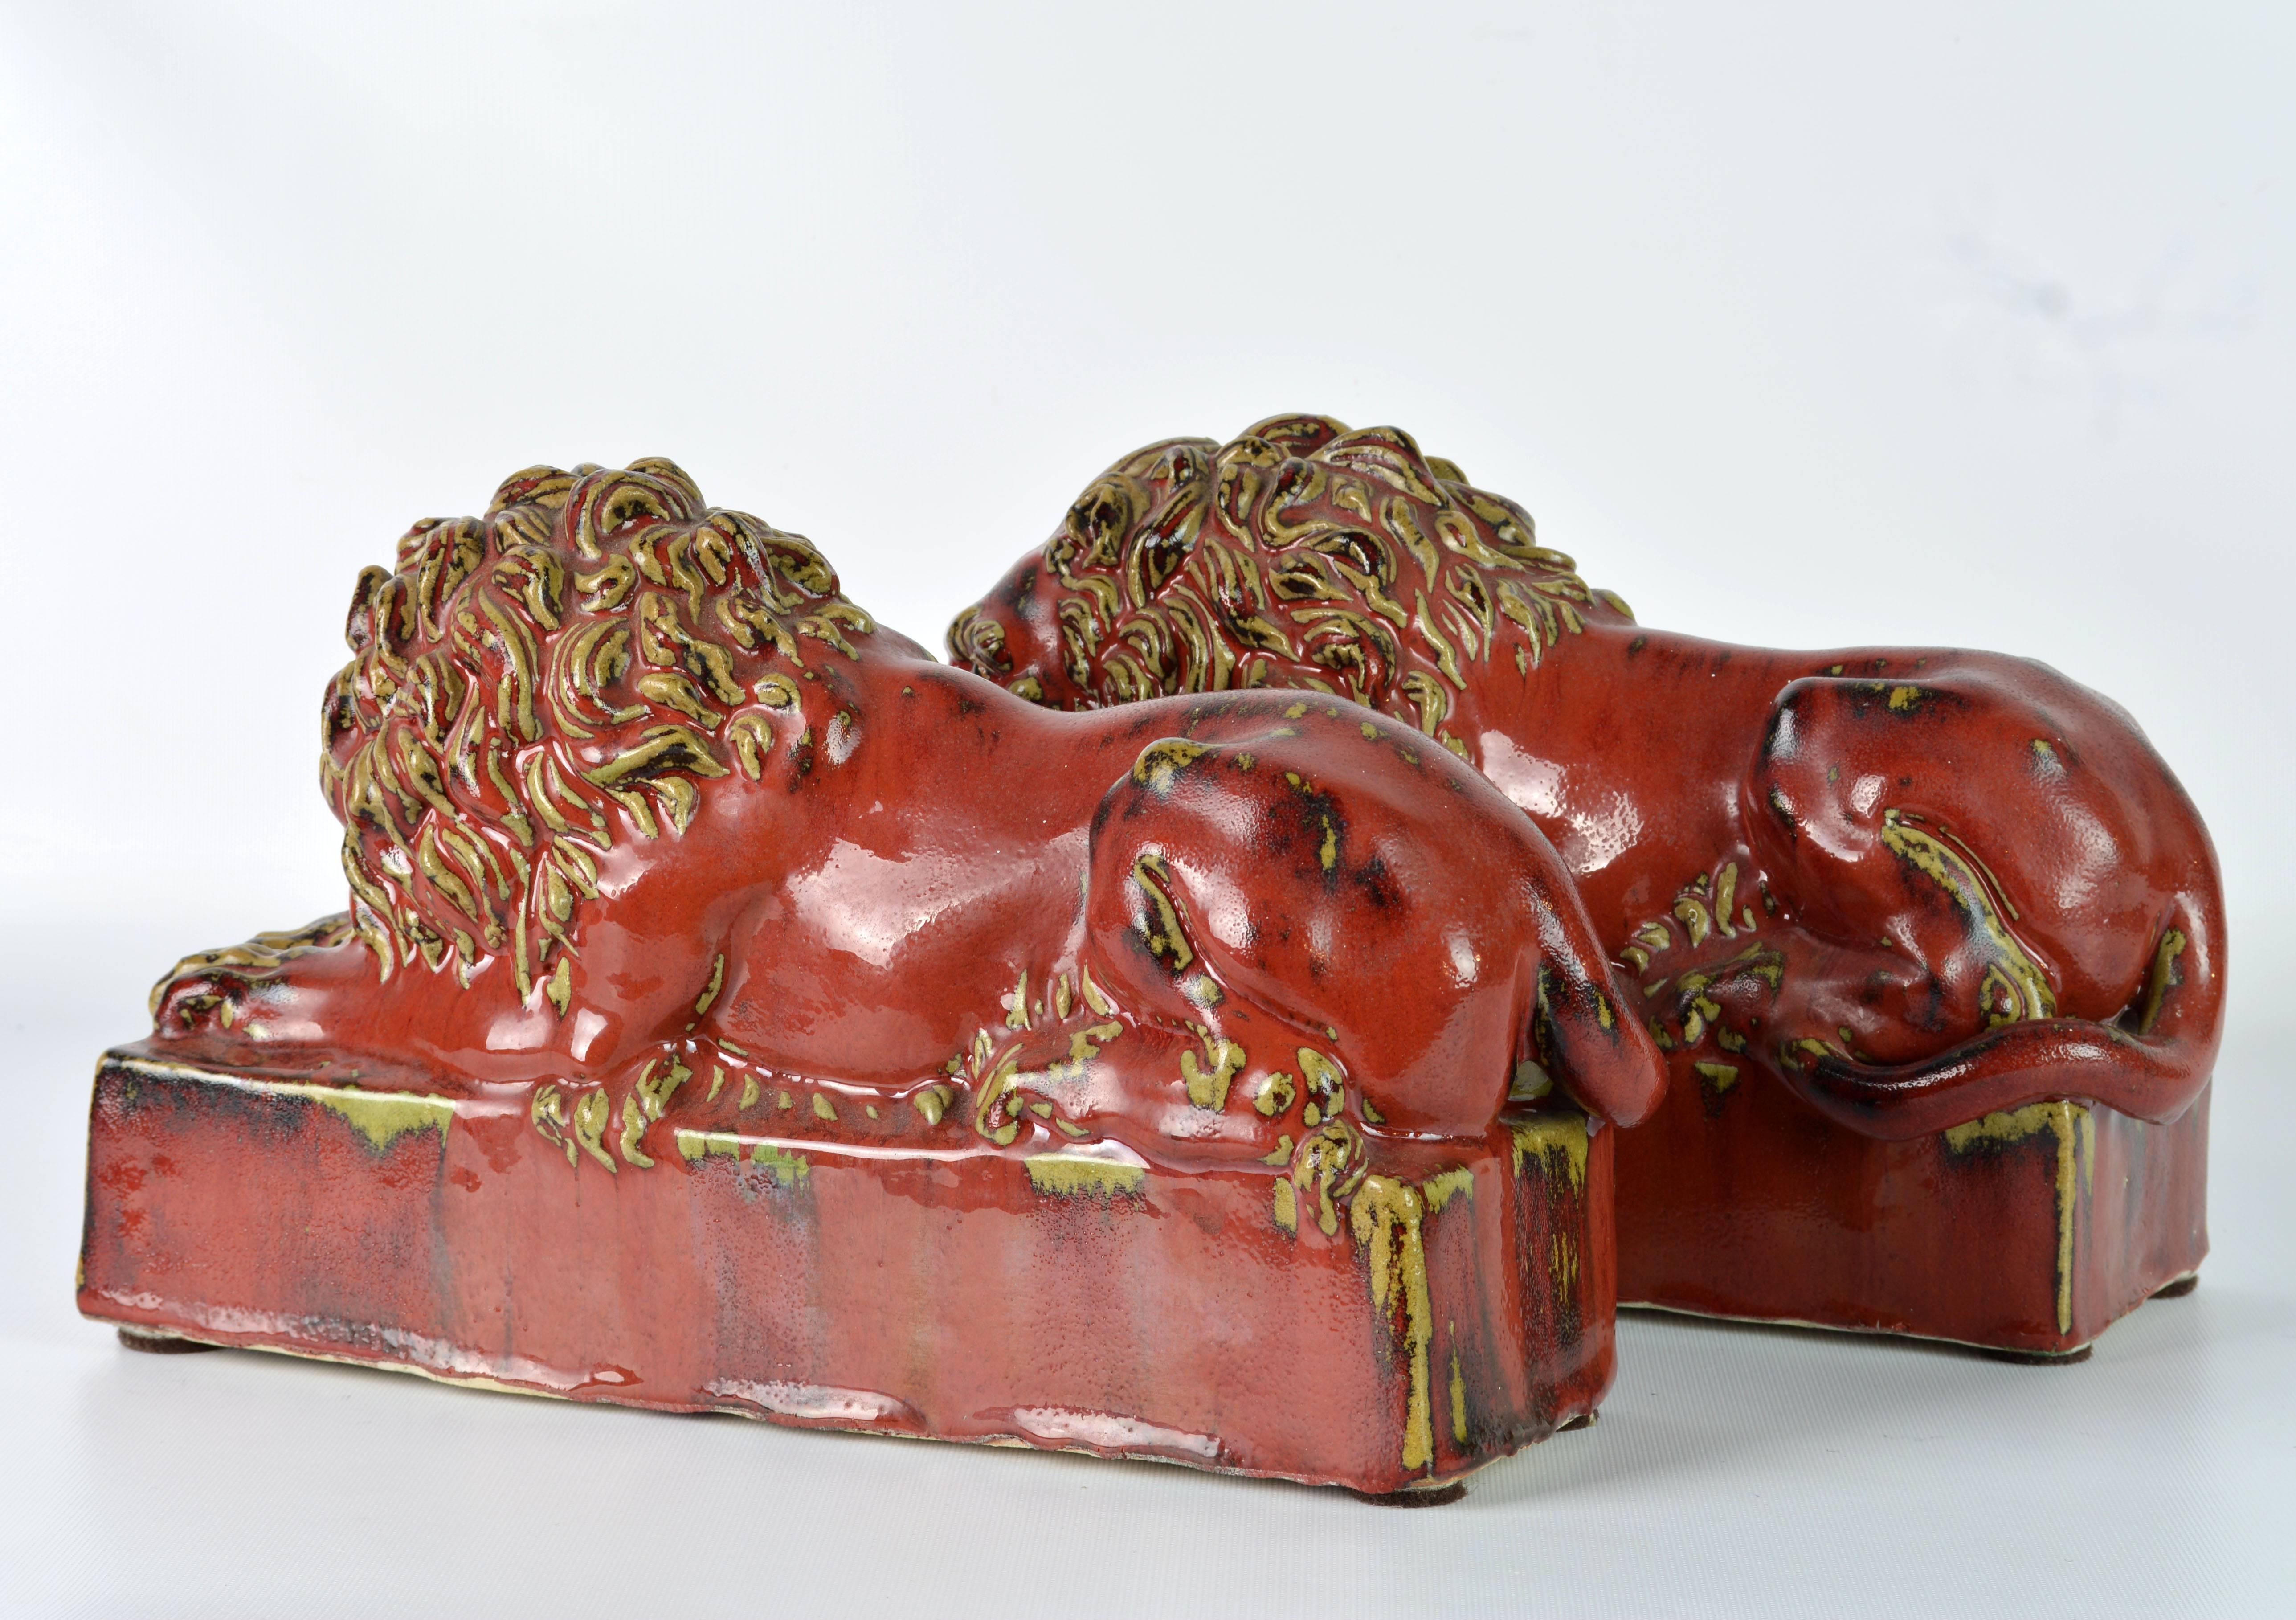 European Opposing Pair of 20th Century Oxblood and Celadon Glazed Ceramic Resting Lions